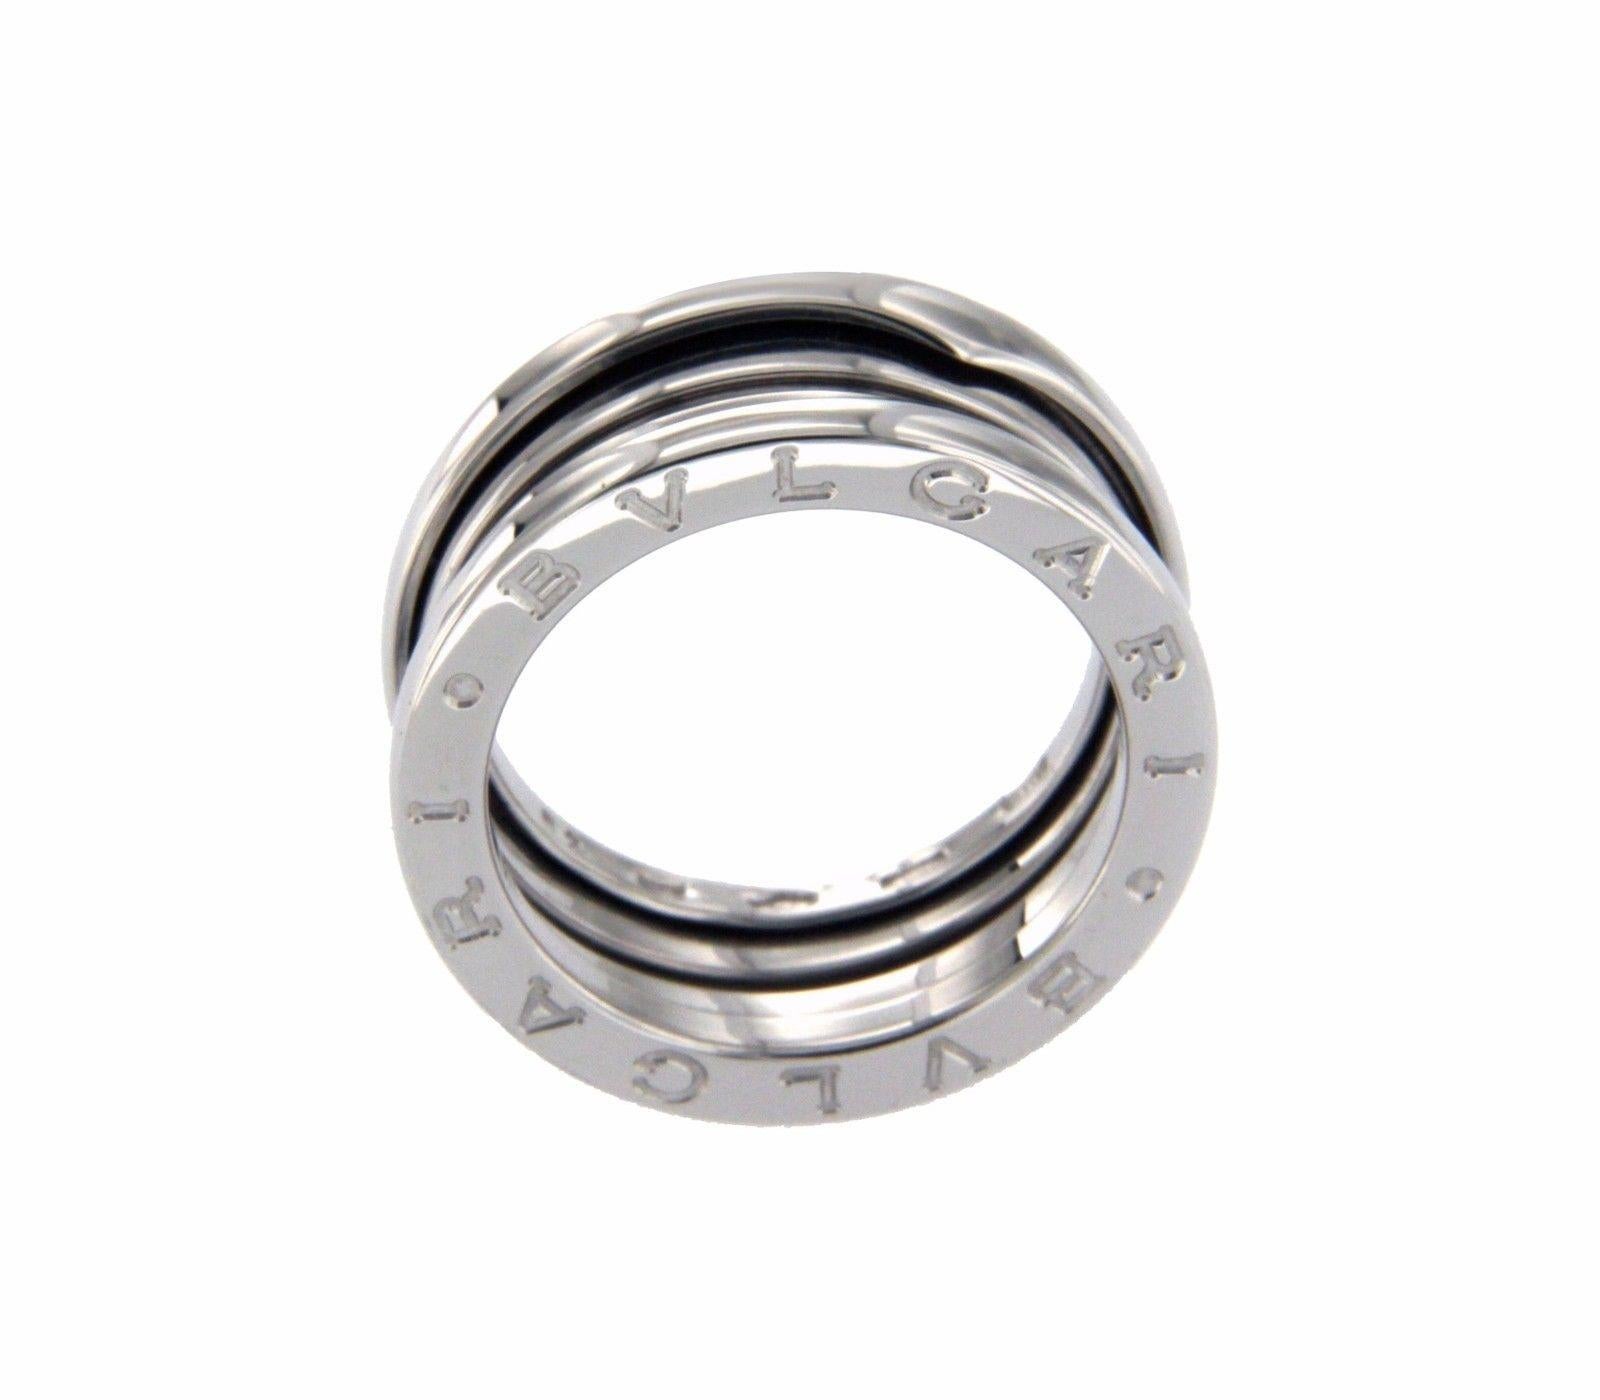 Type: Ring
Top: 8 mm
Band Width: 8 mm
Metal: White Gold
Metal Purity: 18K
Hallmarks: Bvlgari Italy 750 57
Total Weight: 10.4 Grams
Stone Type: None
Condition: Pre-owned
Stock Number: U33